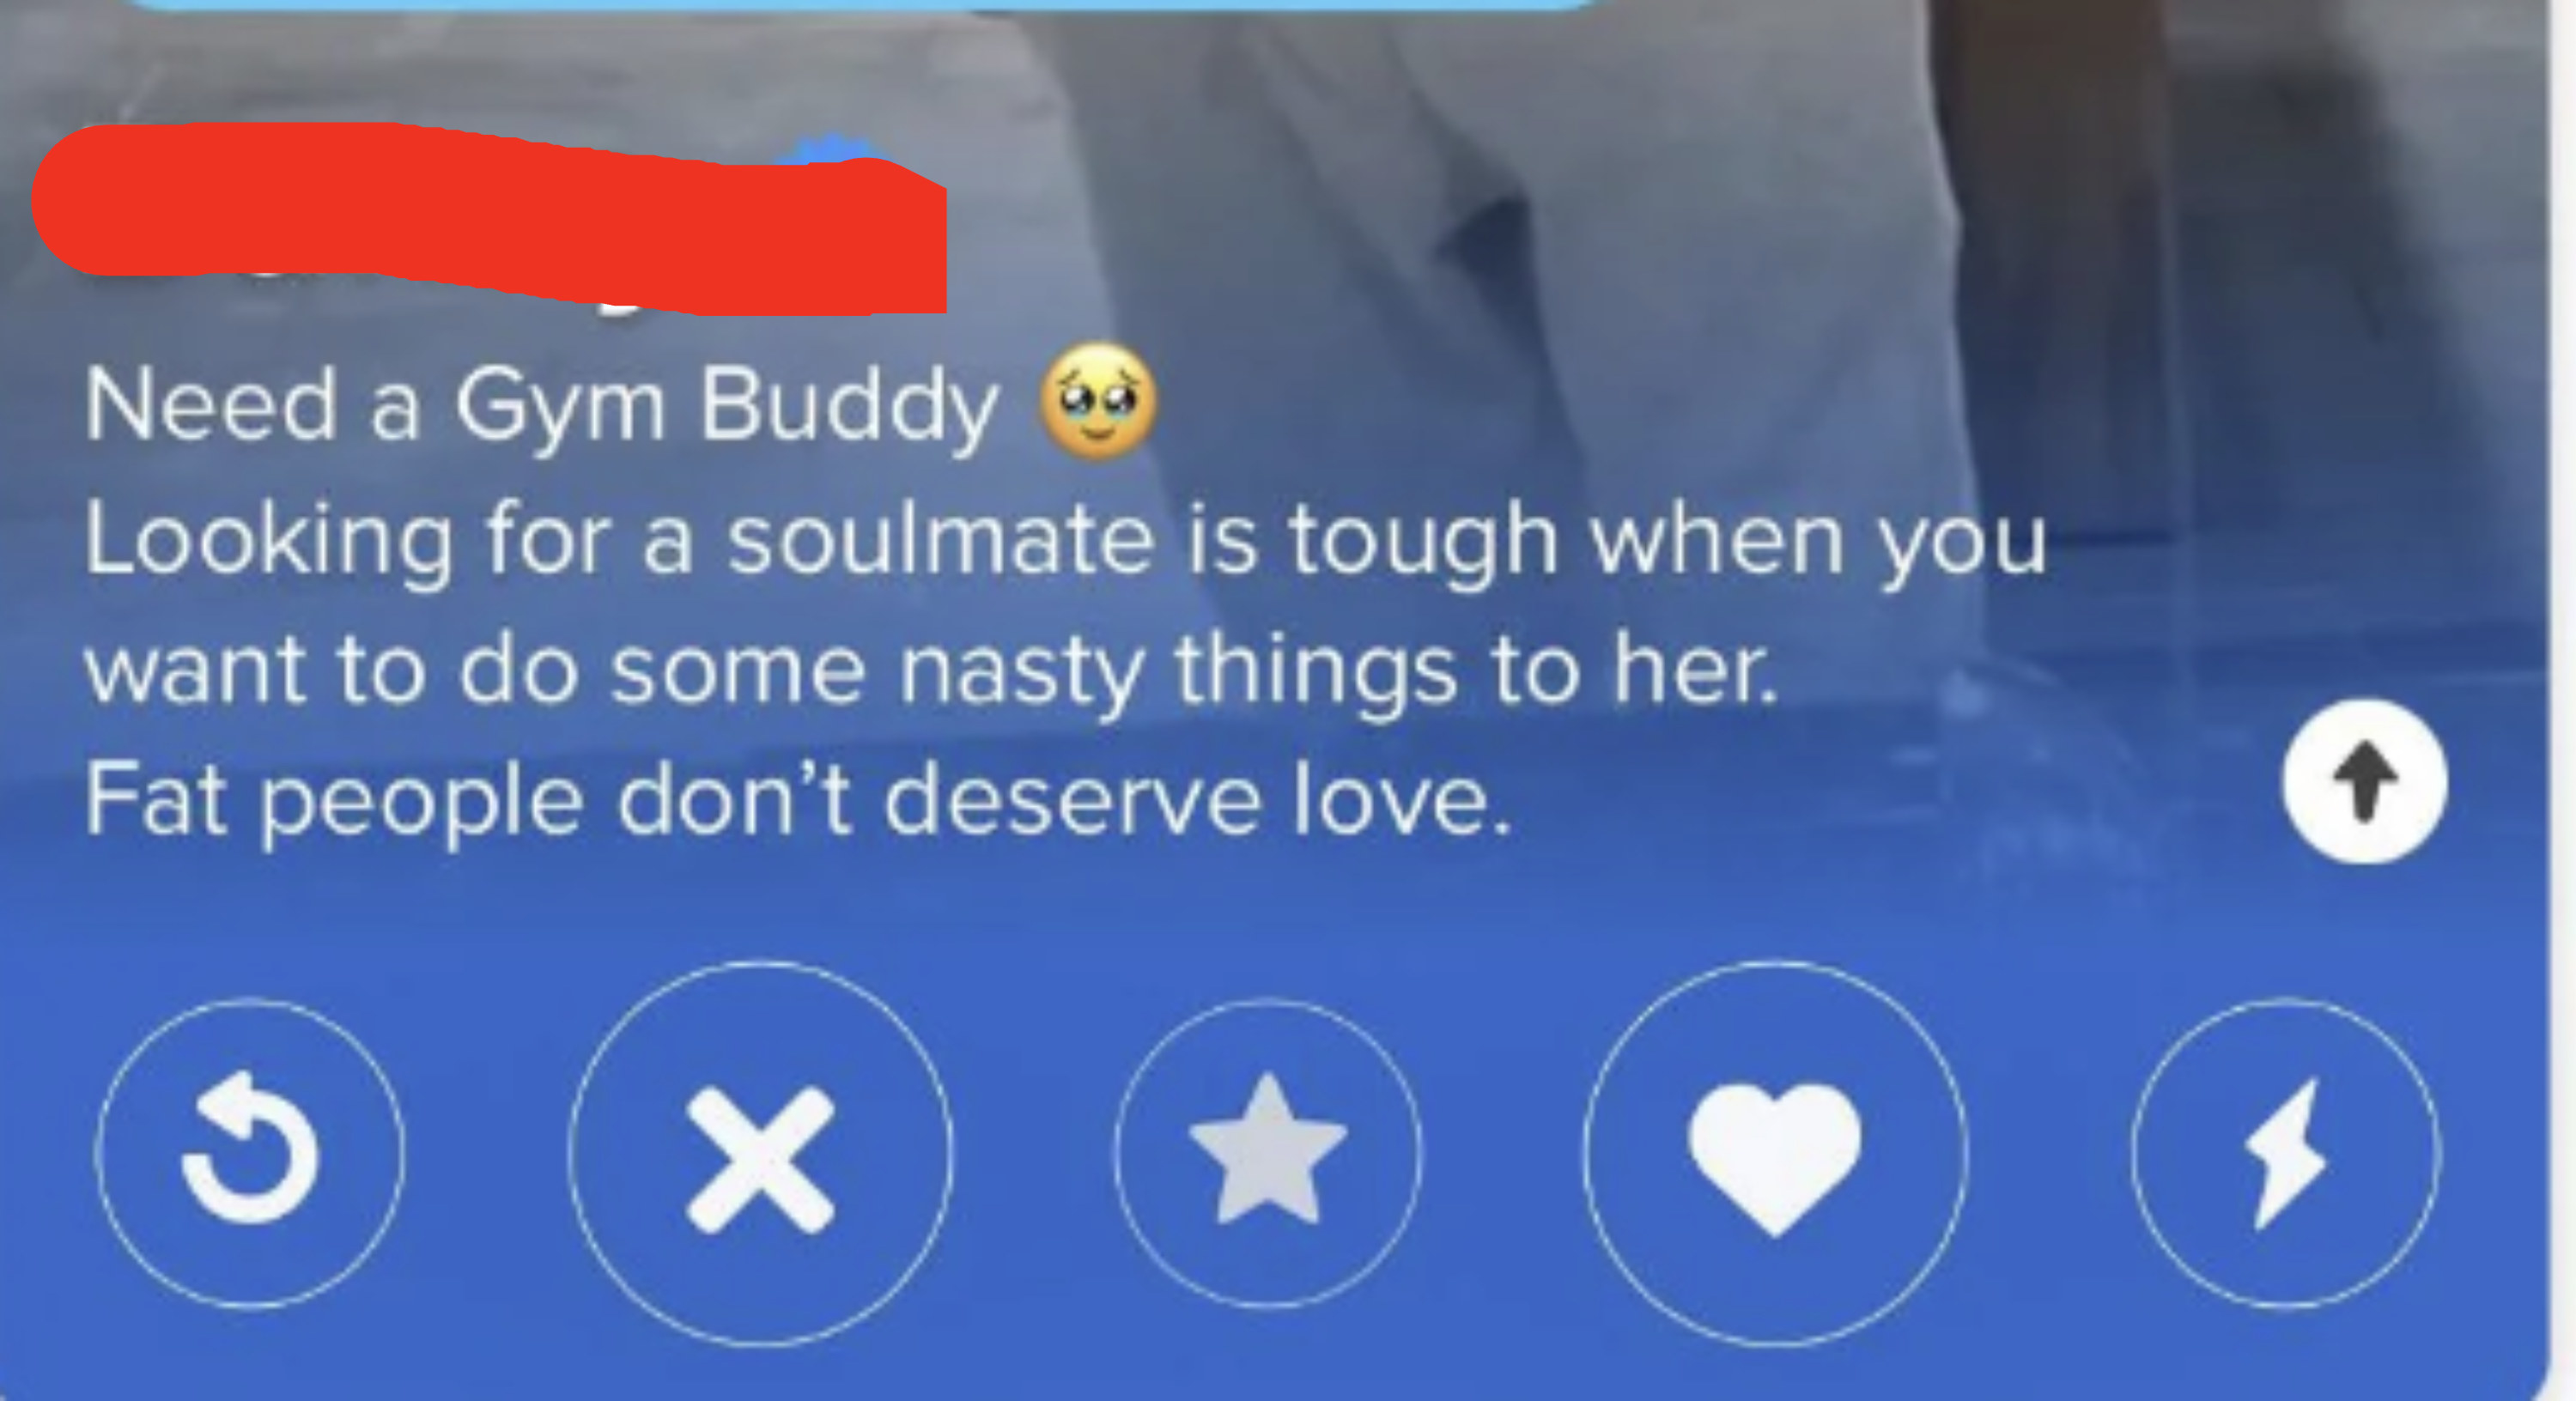 need a gym buddy, looking for a soulmate is tough when you want to do some nasty things to her